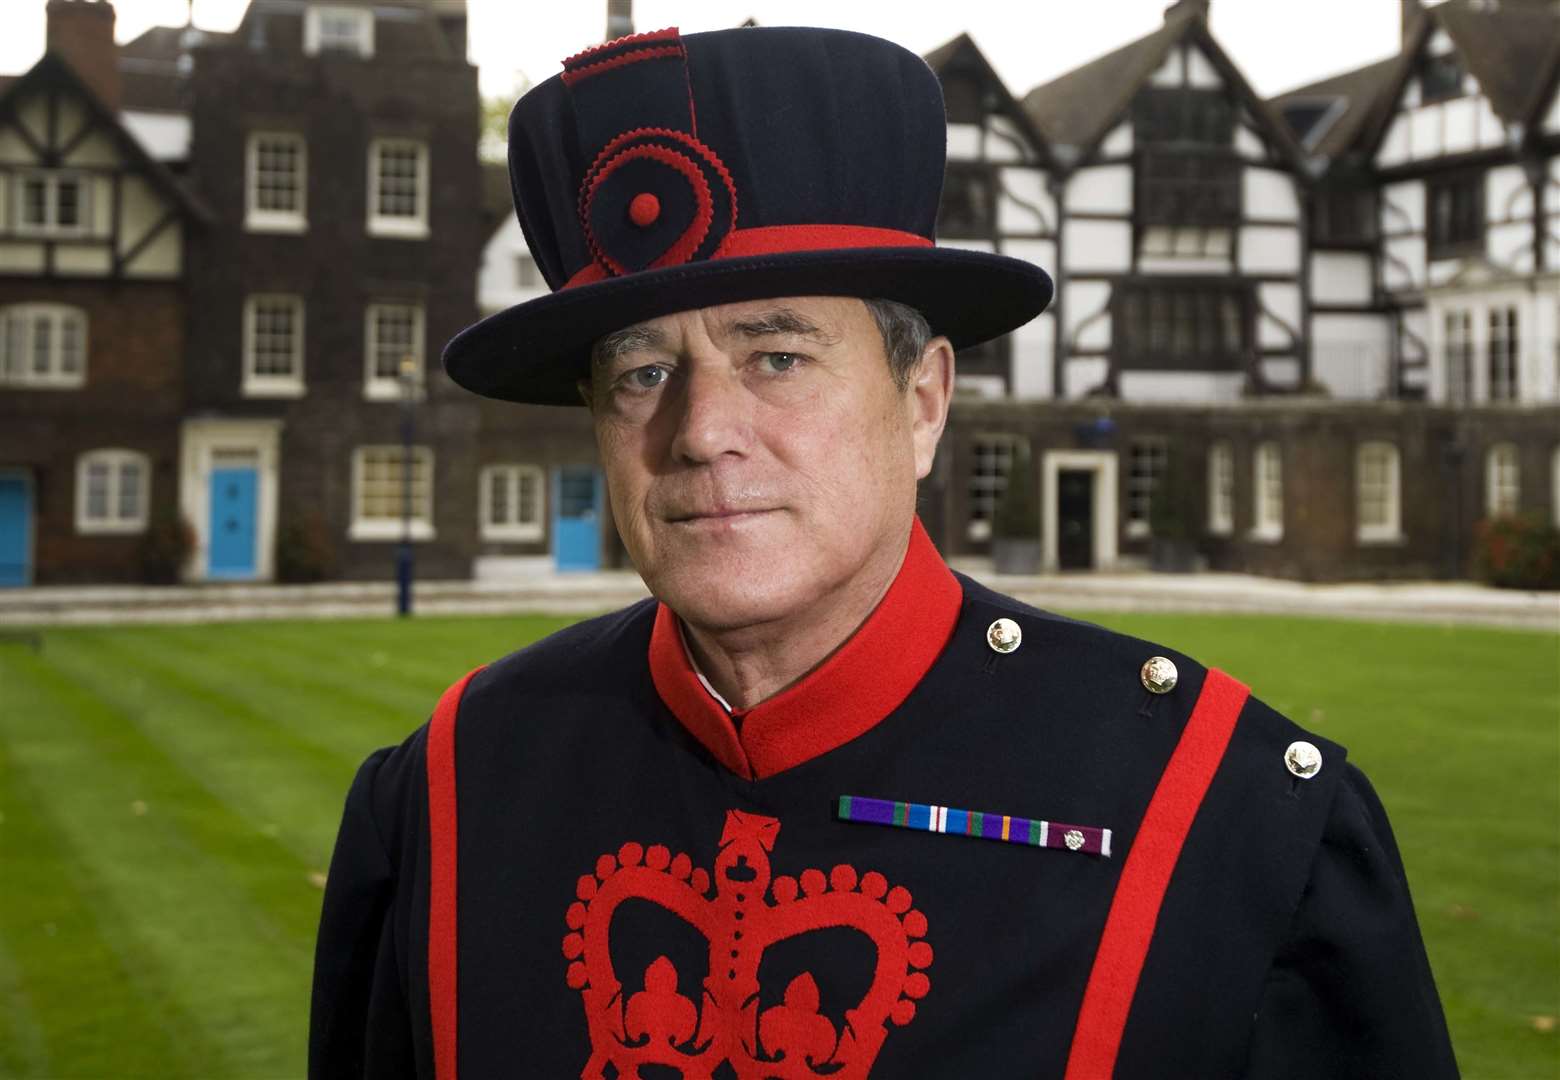 Jim Duncan when he became a Beefeater in 2011